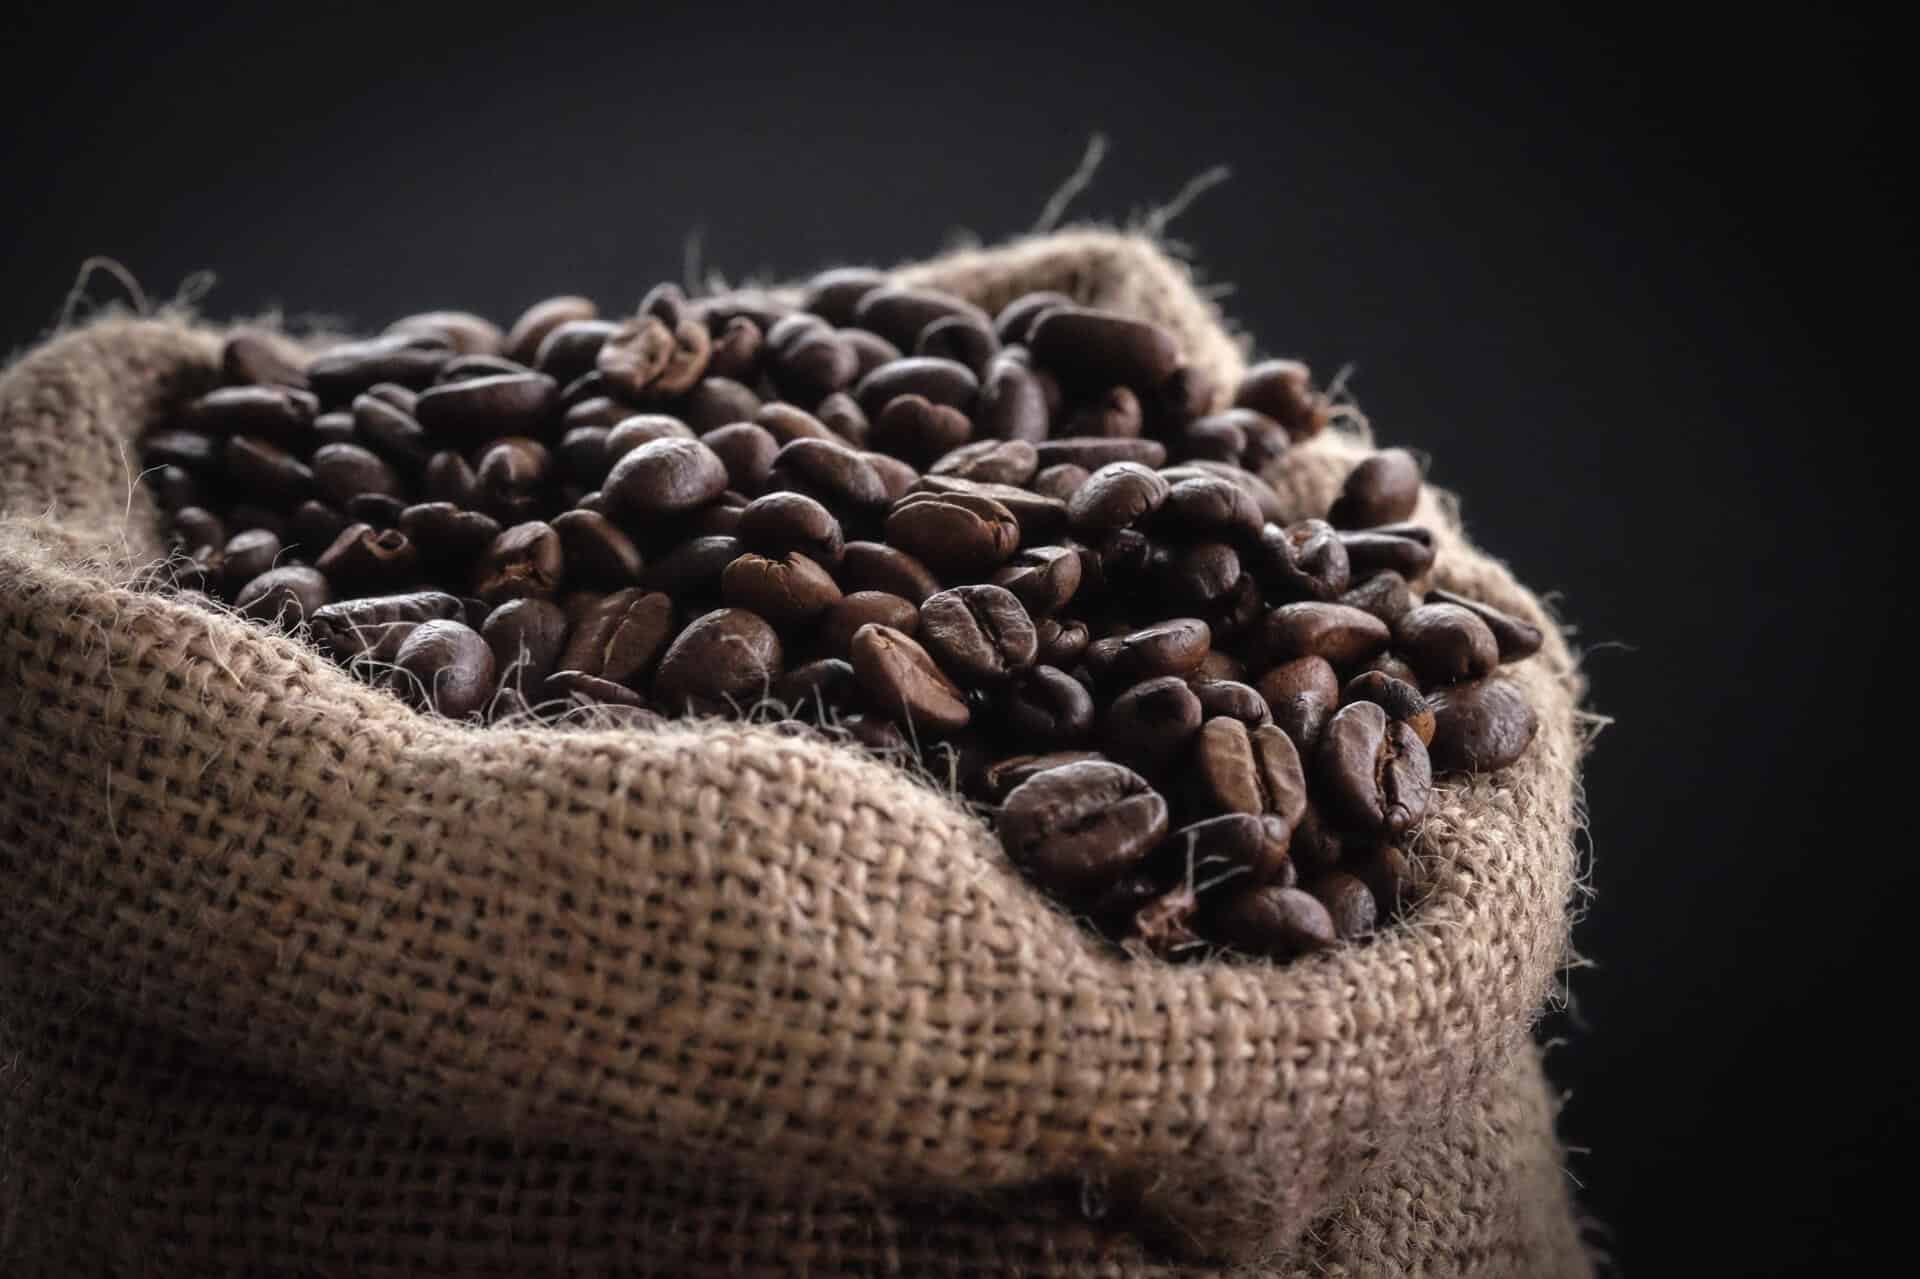 How To Store Coffee Beans